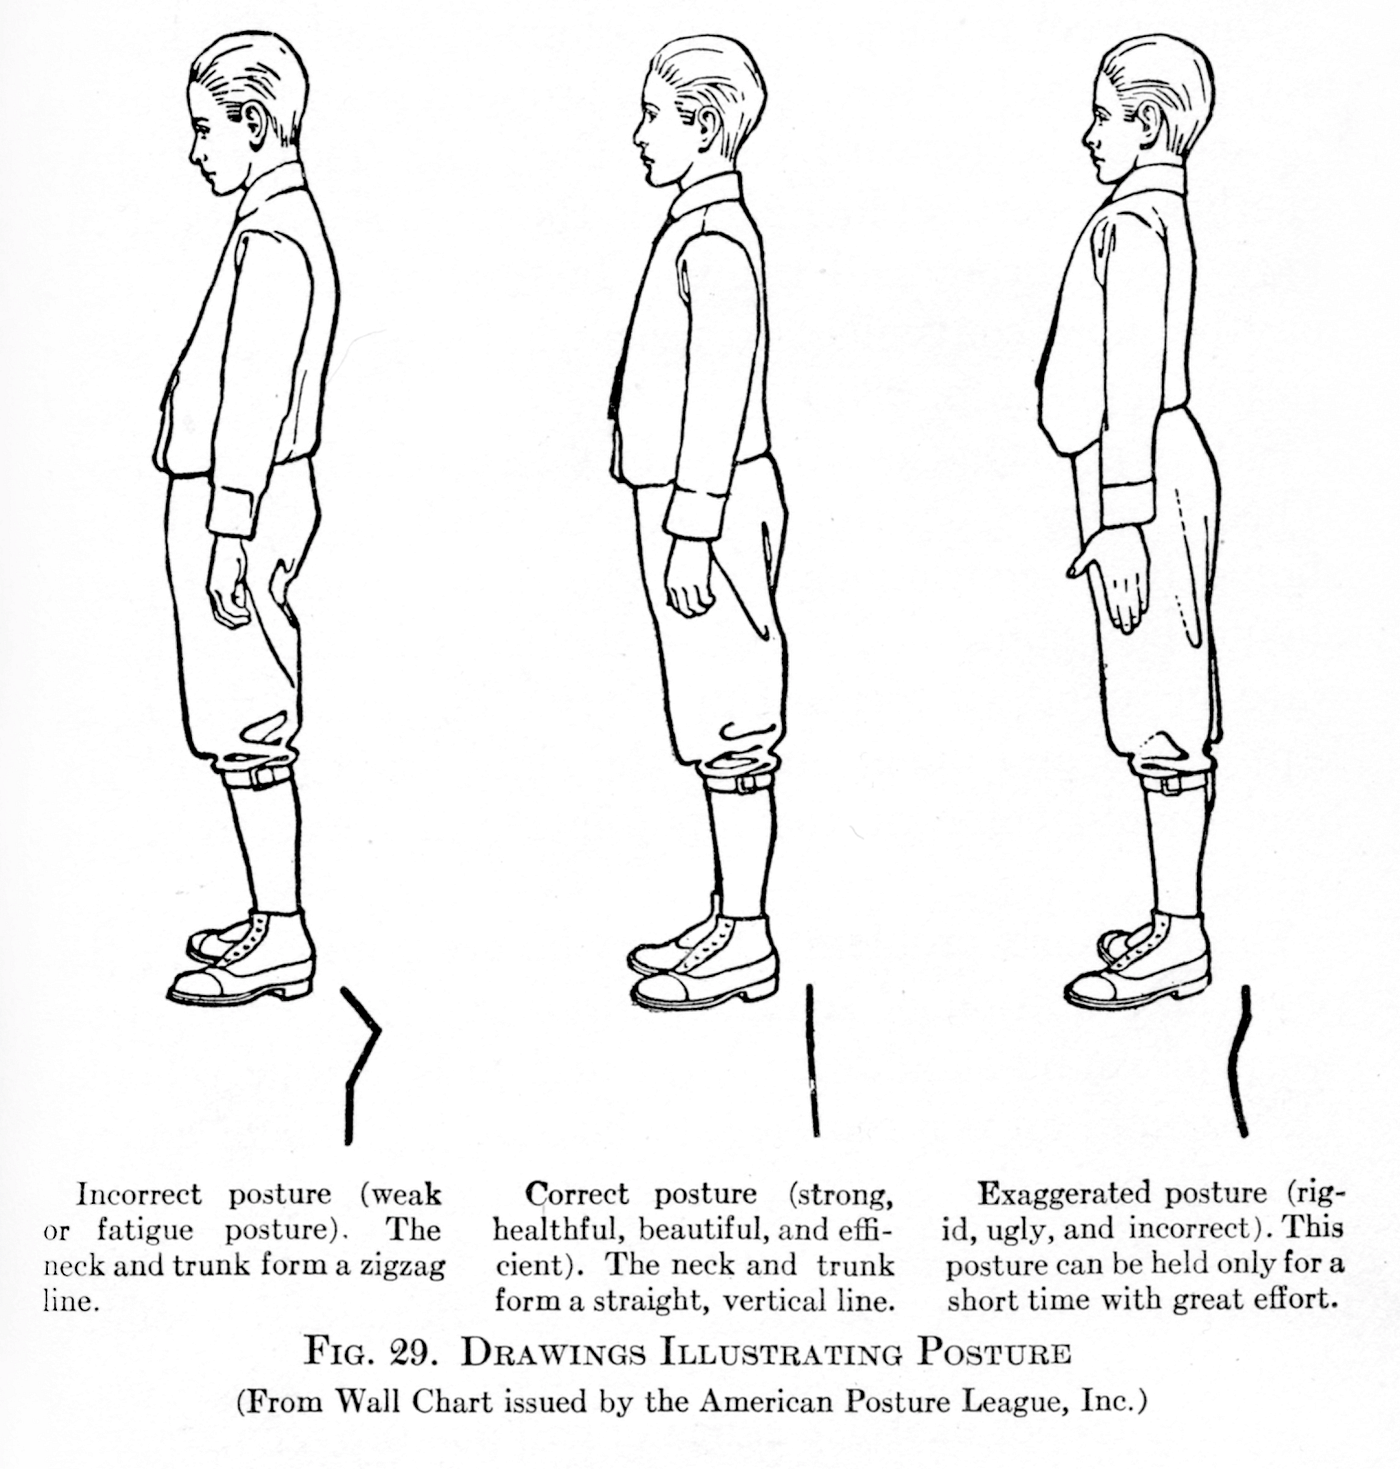 Upright and uptight: the invention of posture, by Tom Jesson